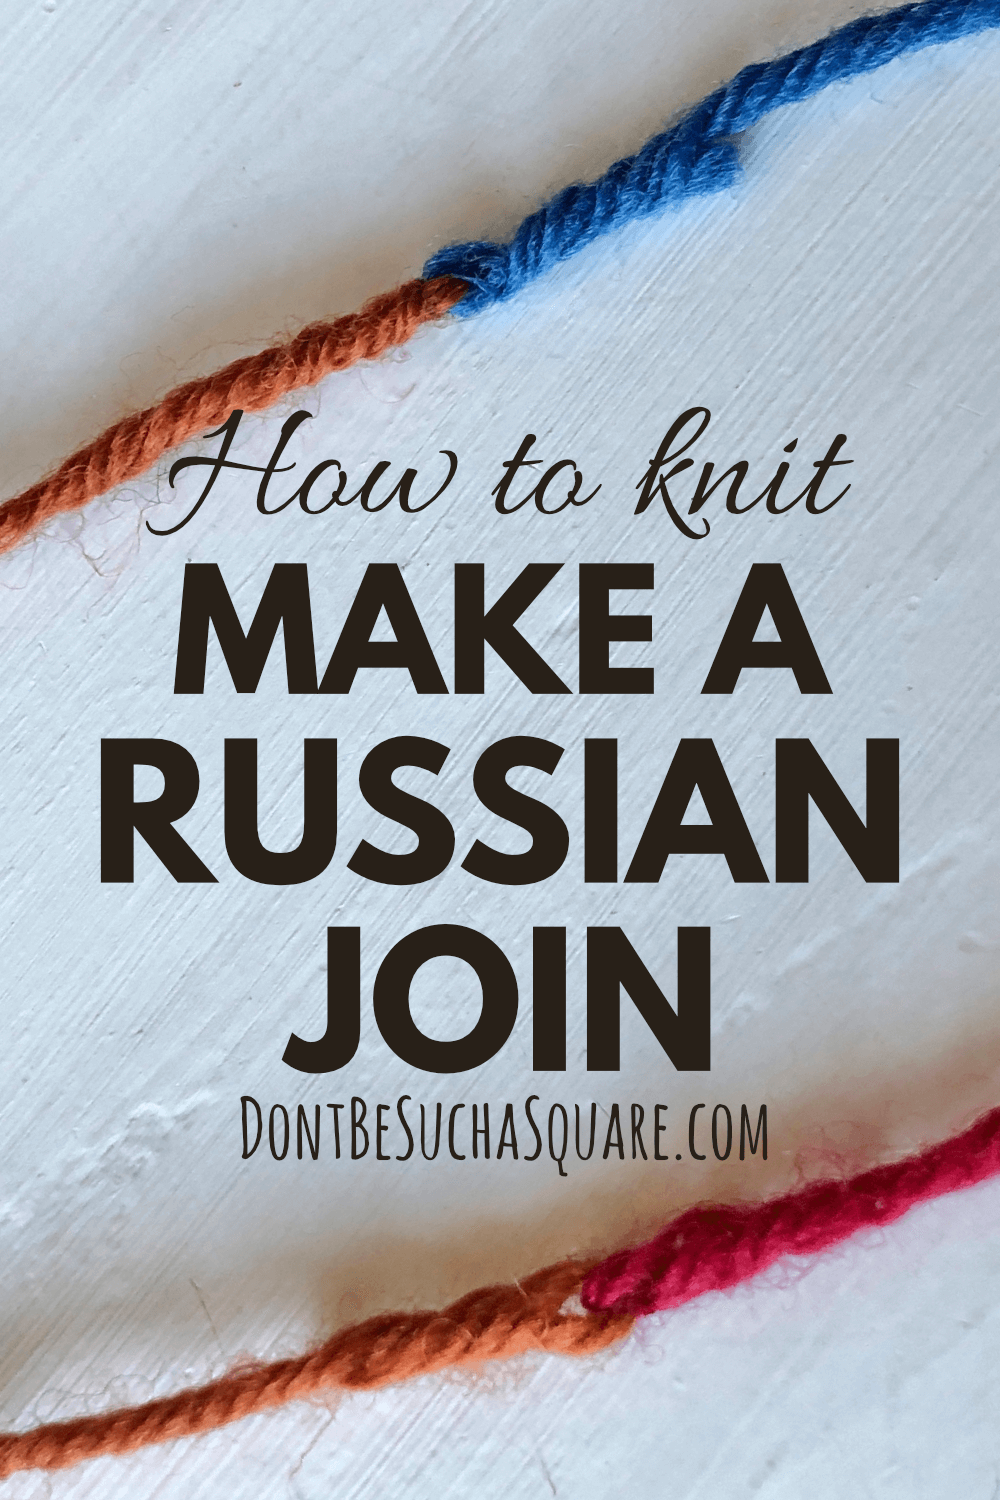 An image with yarn strands knotted together with russian joins. A text overlay says: how to knit make a russian join